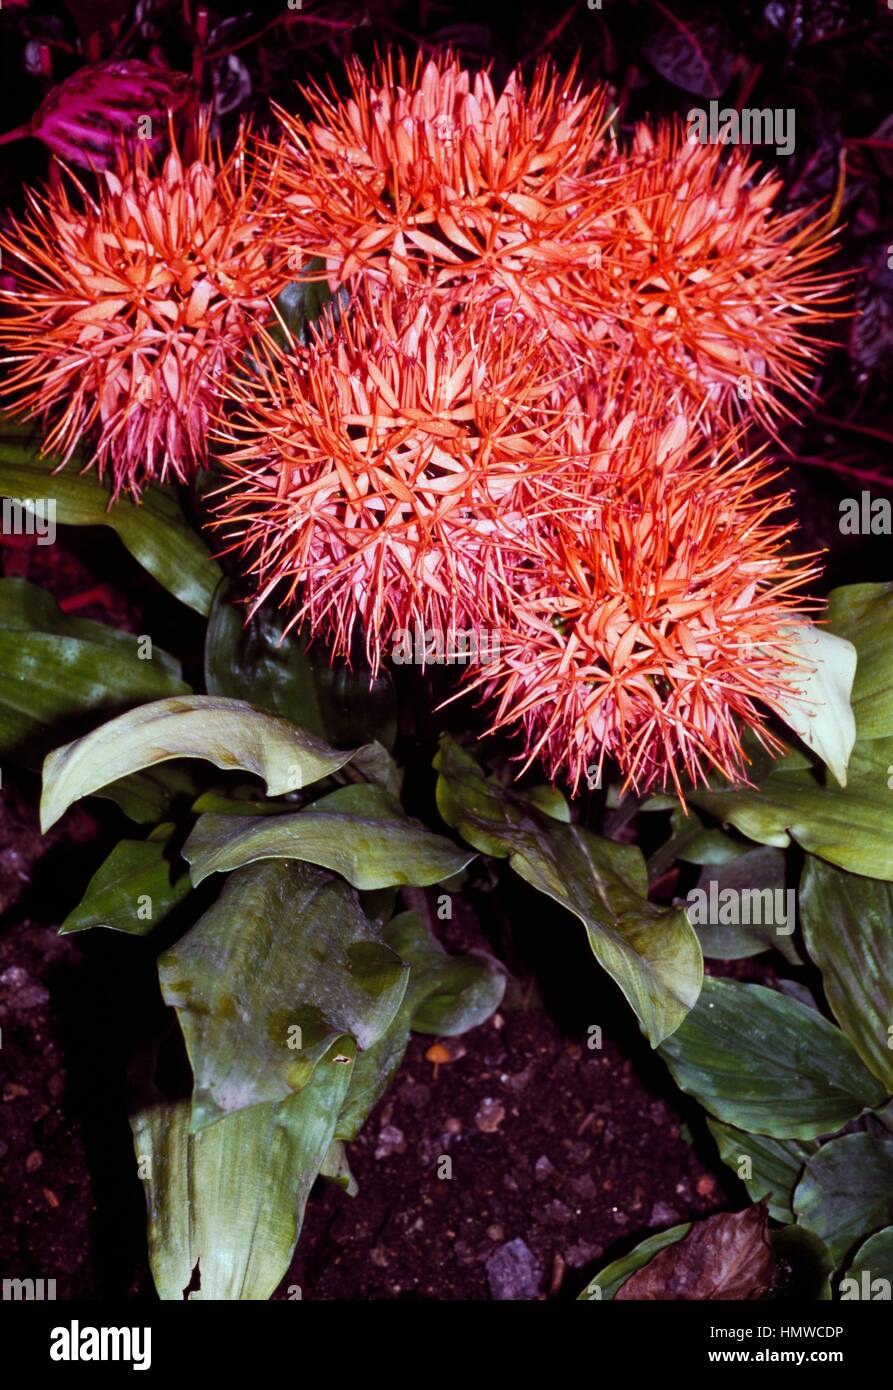 Snake lily or Blood lily (Haemanthus magnificus or Scadoxus puniceus), Amaryllidaceae. Stock Photo